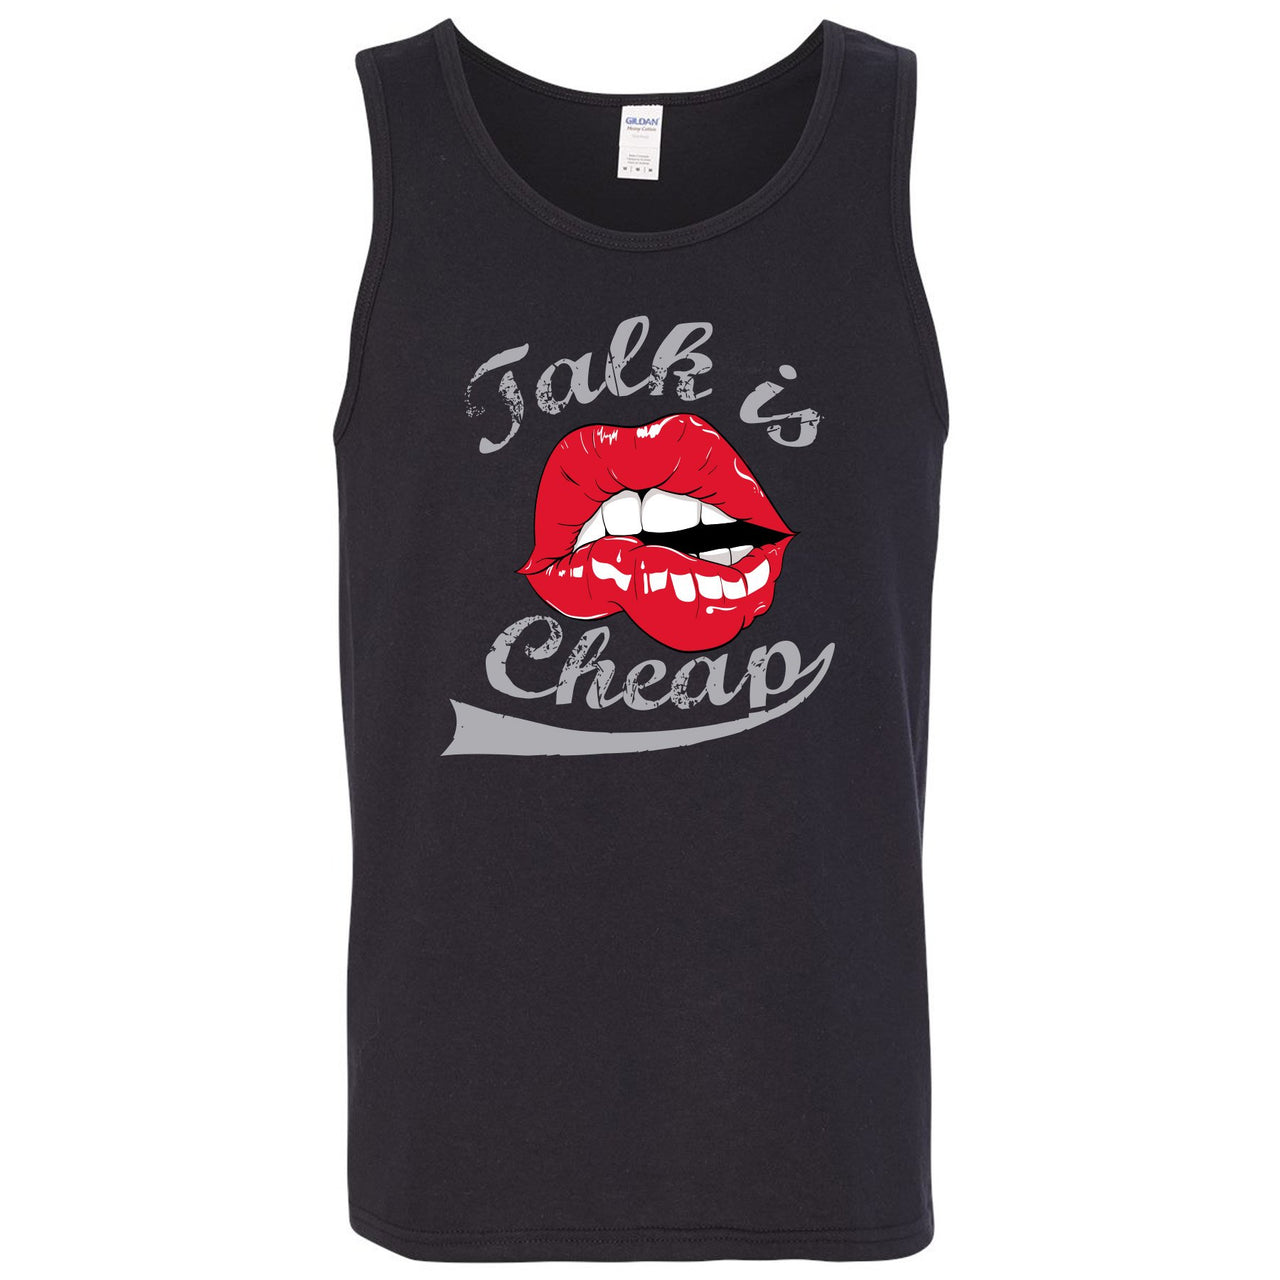 Reflections of a Champion 8s Mens Tank Top | Talking Lips, Black